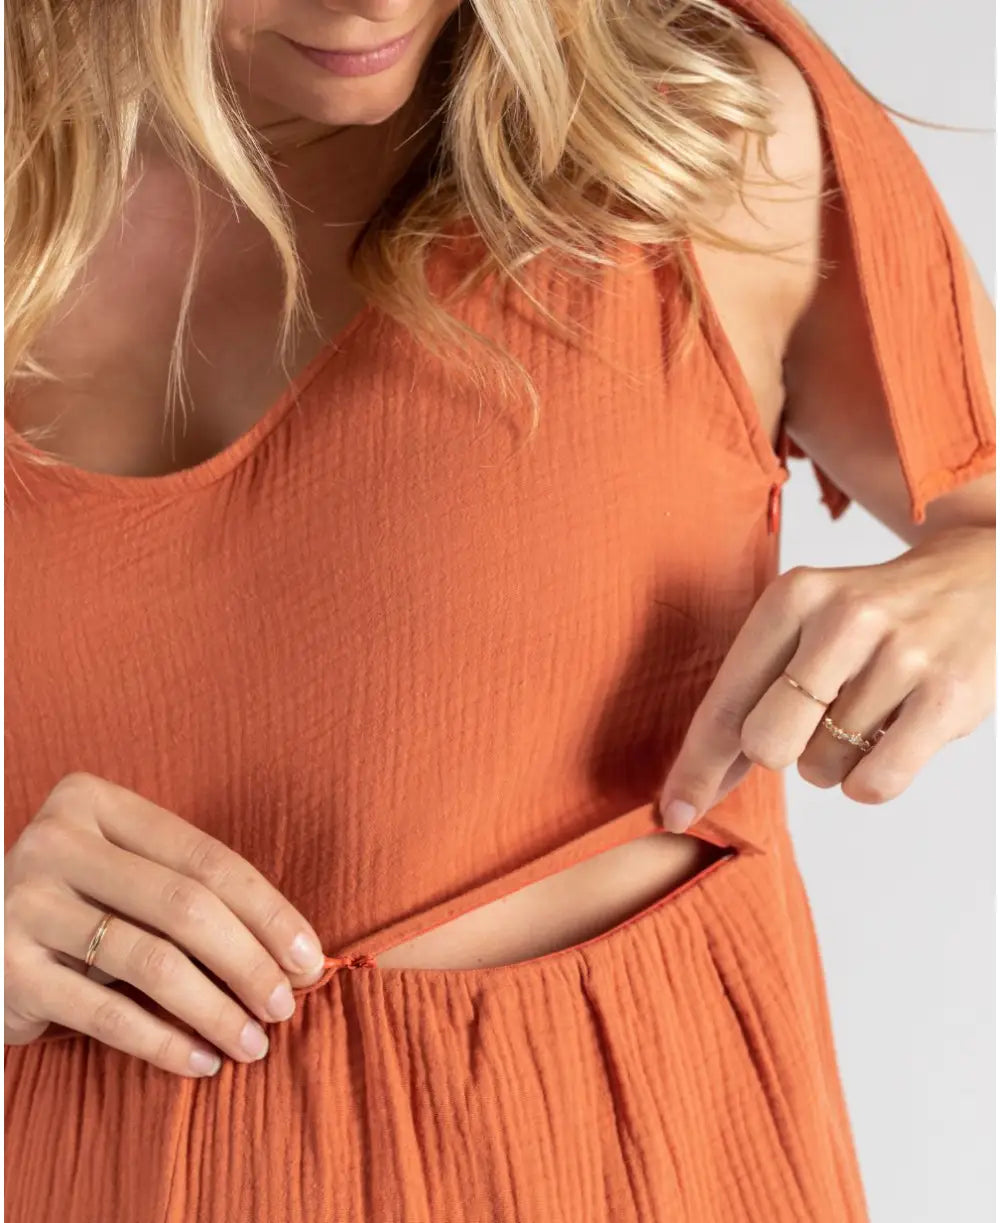 Pregnancy and nursing suit Canyon copper - Maternity